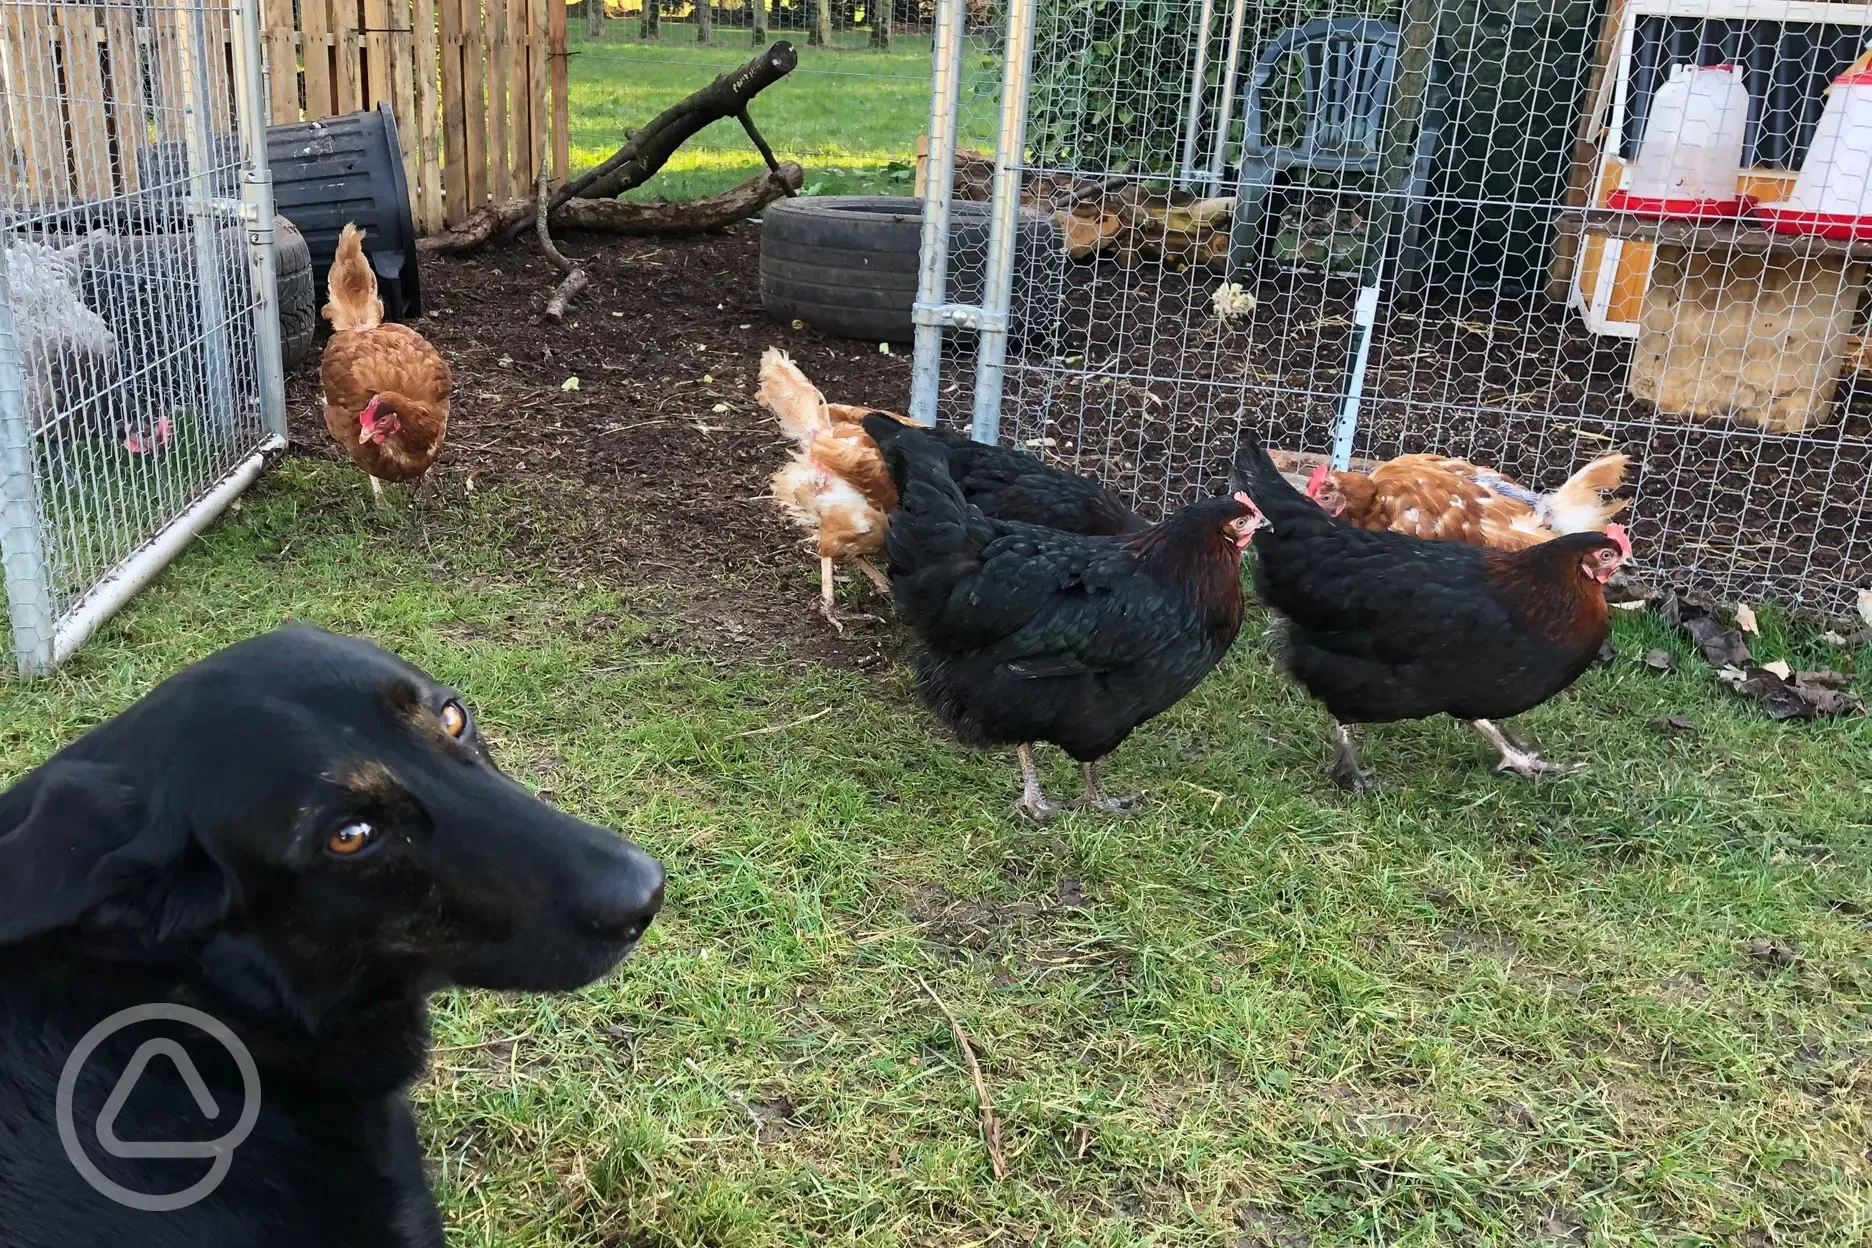 Chickens, and we have rabbits too!